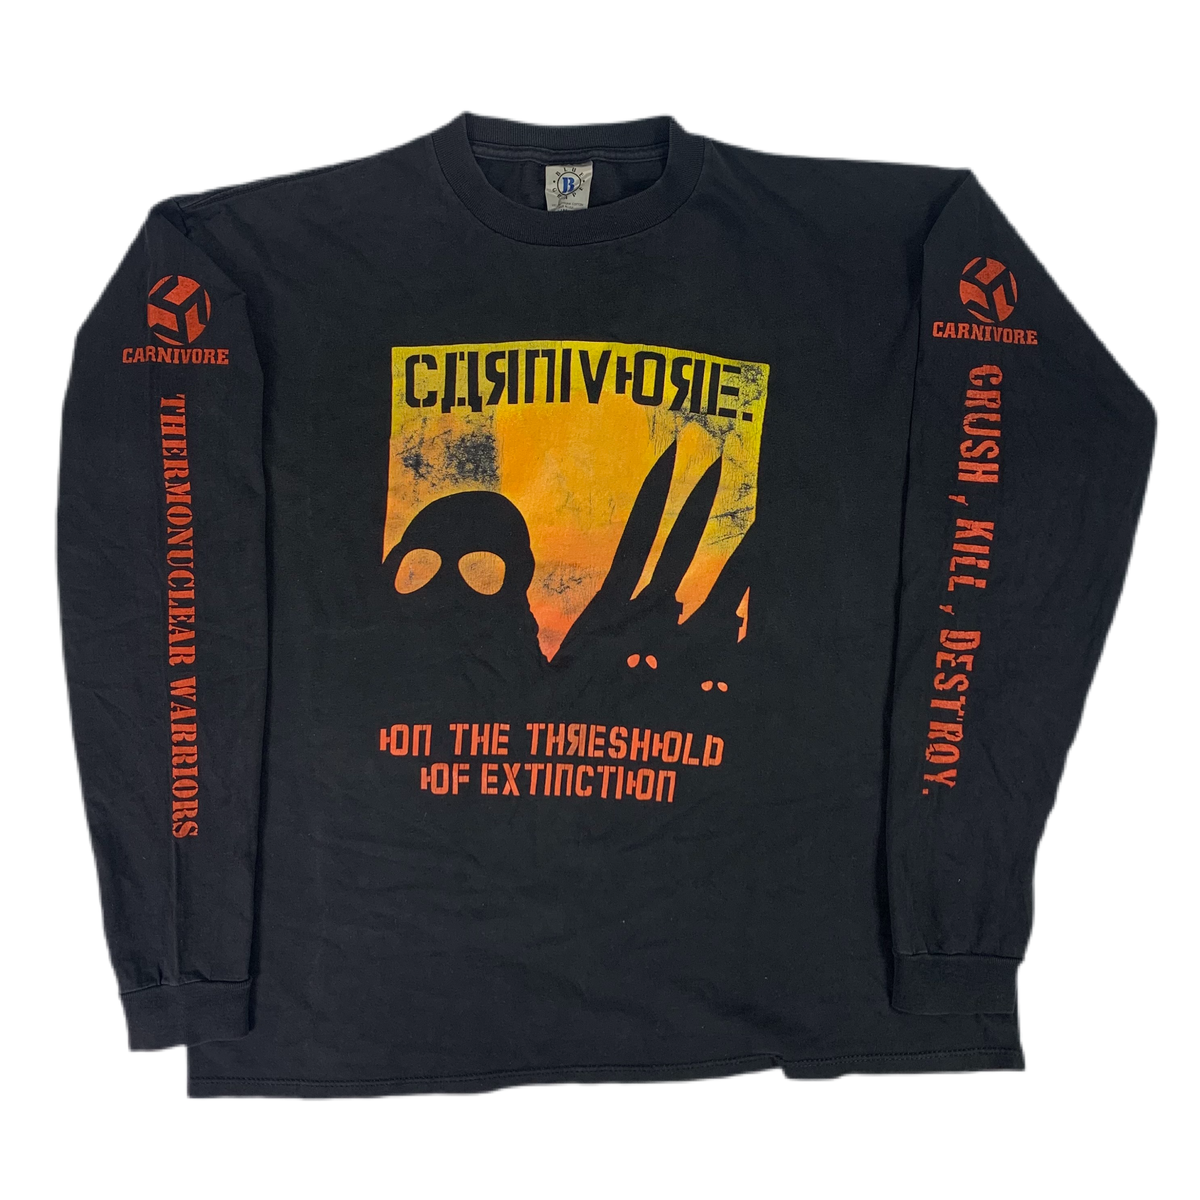 Vintage Carnivore “Thermonuclear Warriors” Long Sleeve Shirt